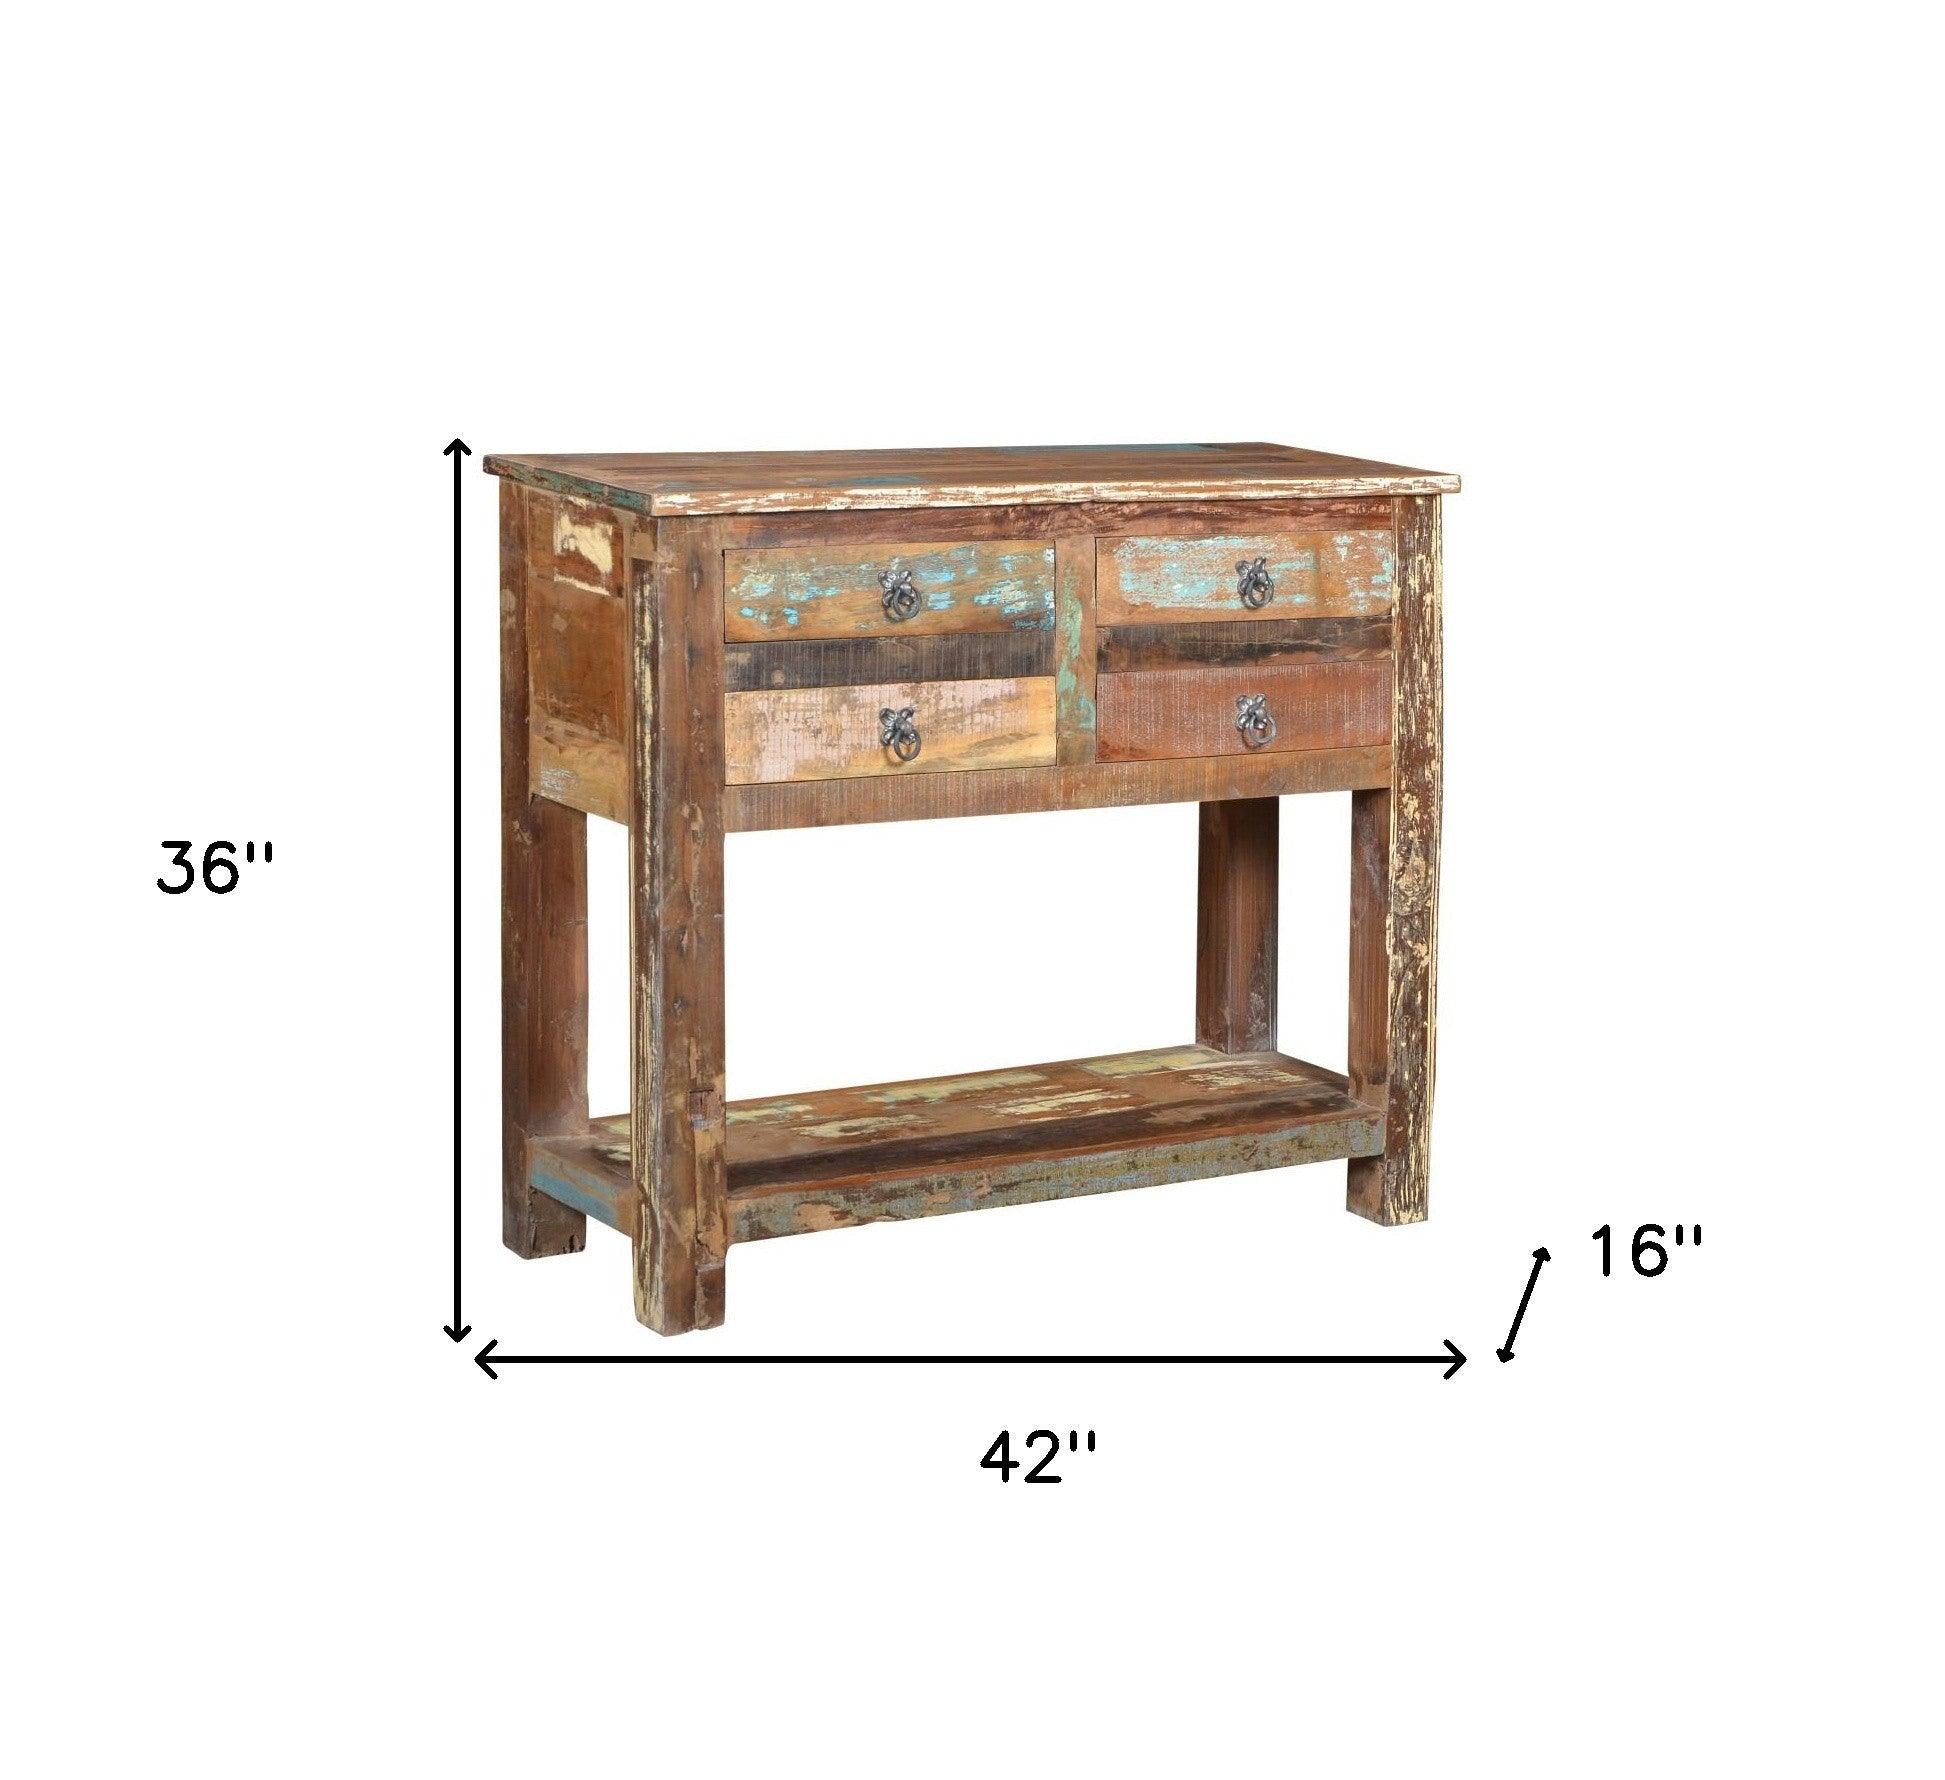 42" Brown Solid Wood Distressed Floor Shelf Console Table With Shelves And Drawers - FurniFindUSA